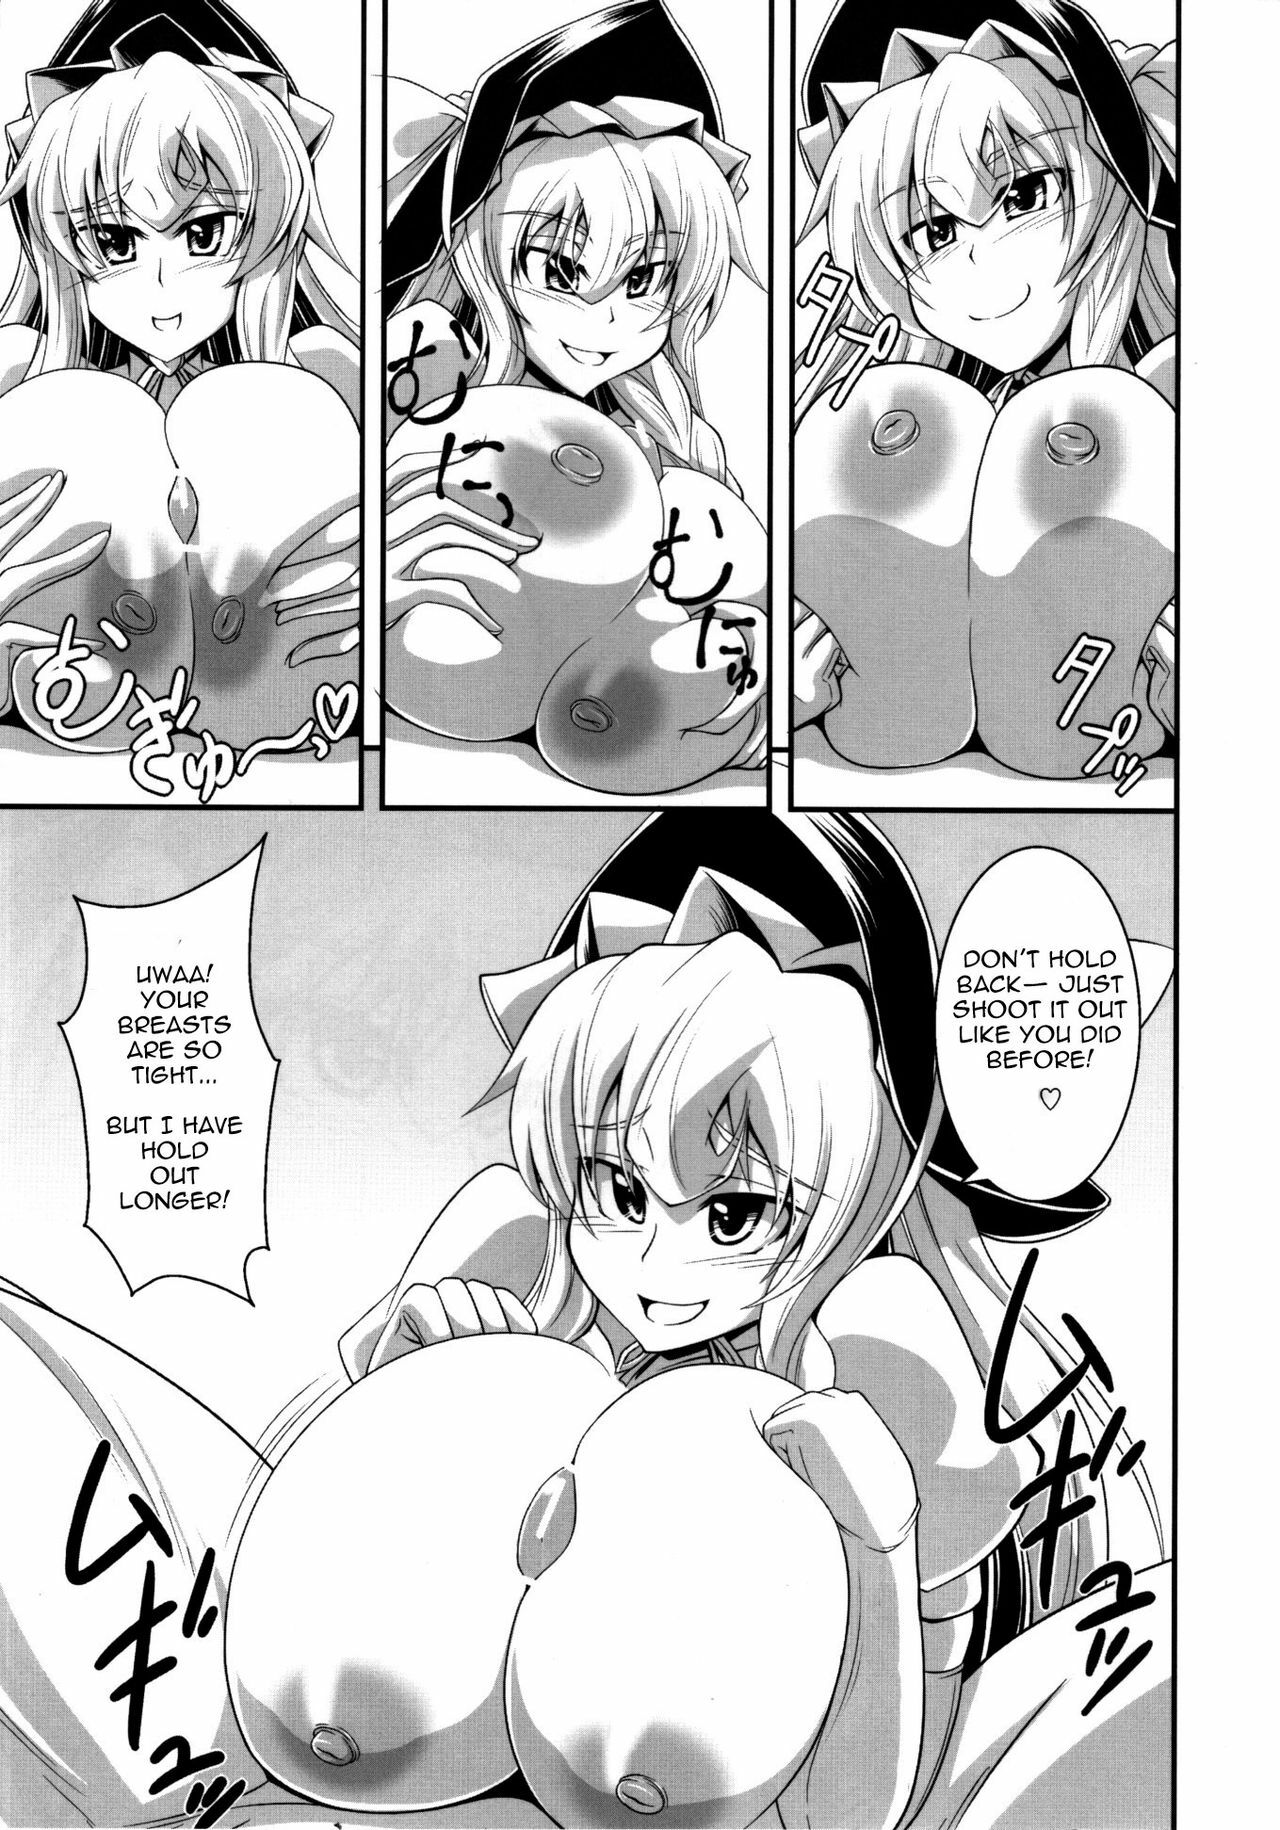 (Kouroumu 6) [Forever and ever... (Eisen)] GLAMOROUS MARISA (Touhou Project) [English] =Pineapples r Us= page 9 full